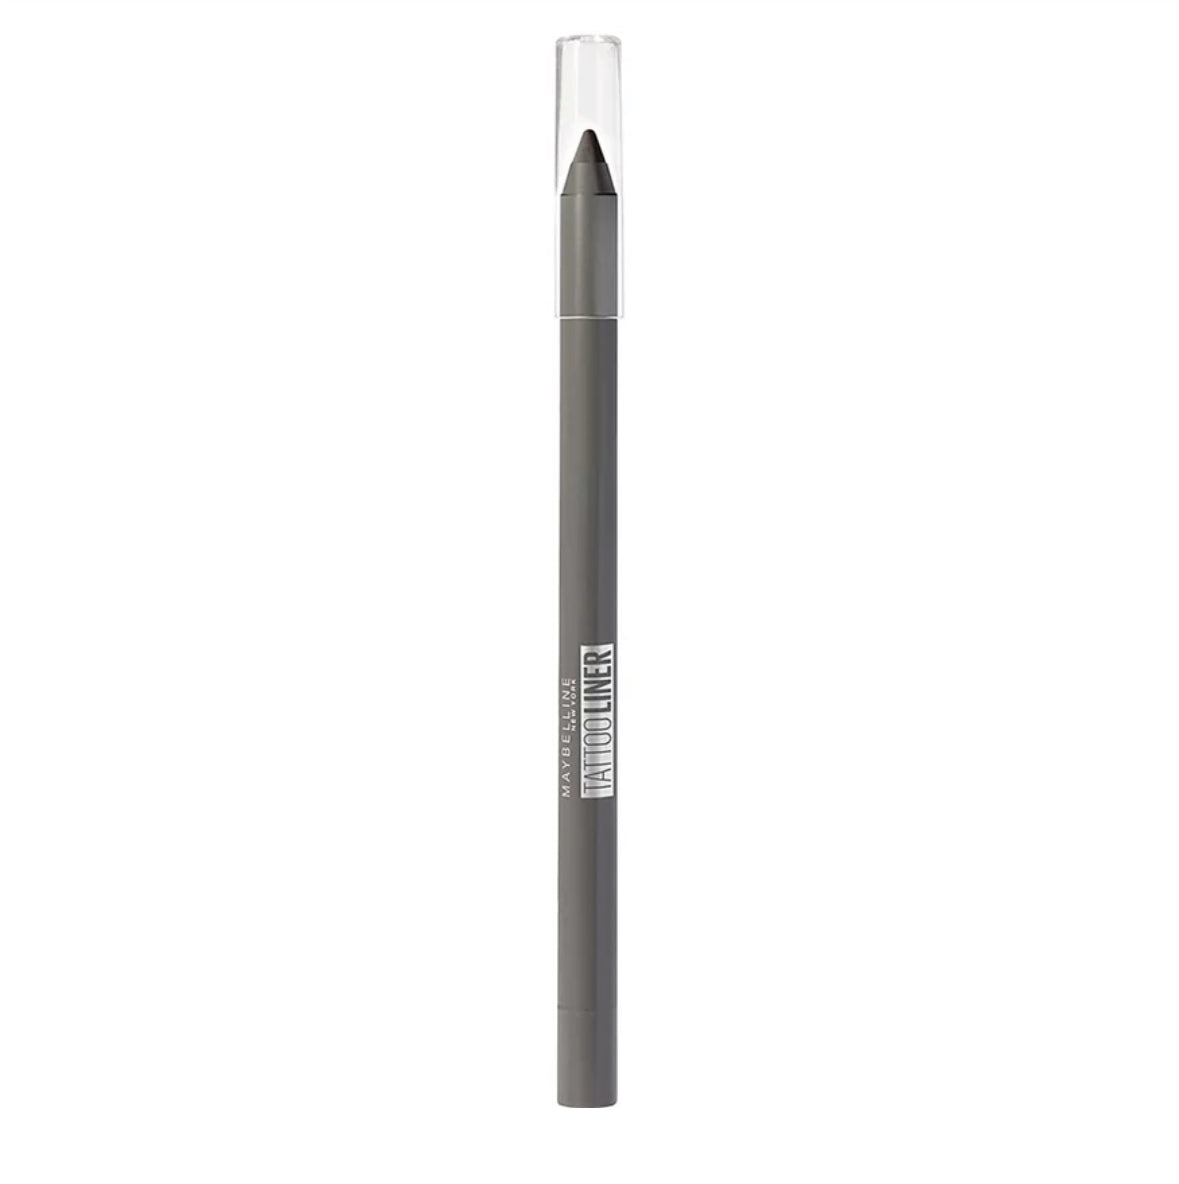 Tattoo 901 Pencil Charcoal – Cosmetics Traboulsi Liner Maybelline Gel Intense